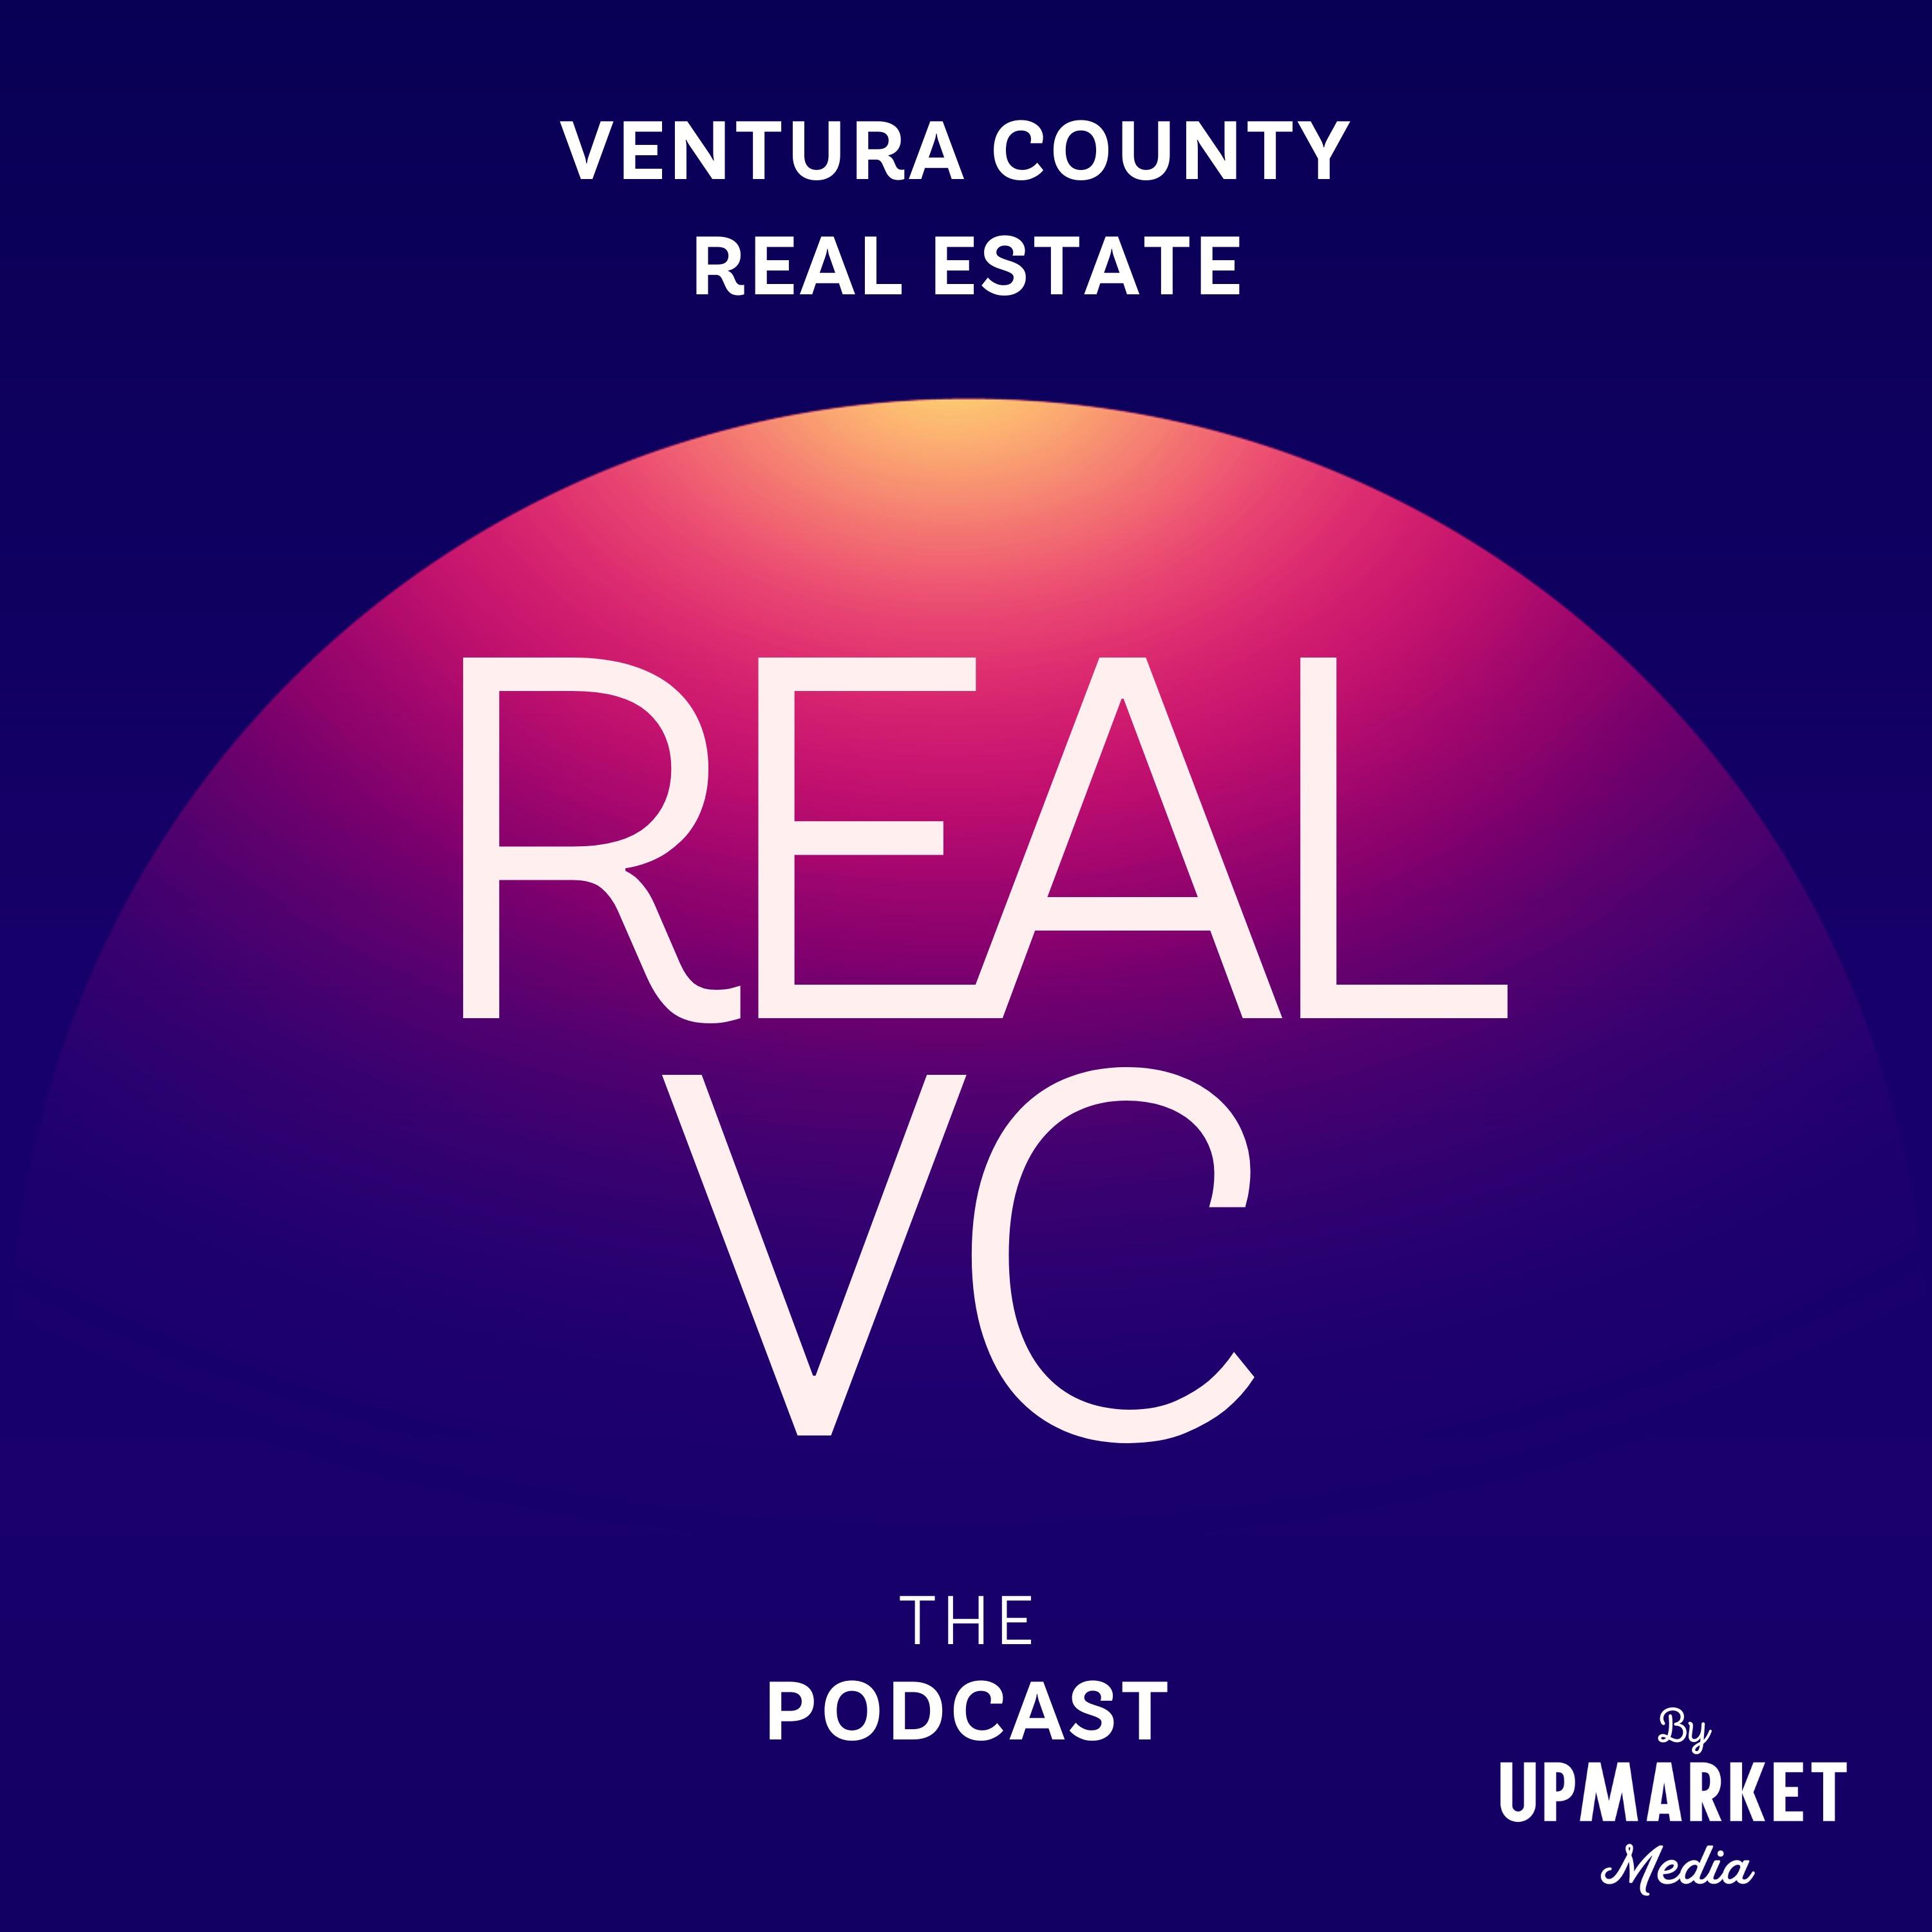 Real VC: Ventura County Real Estate